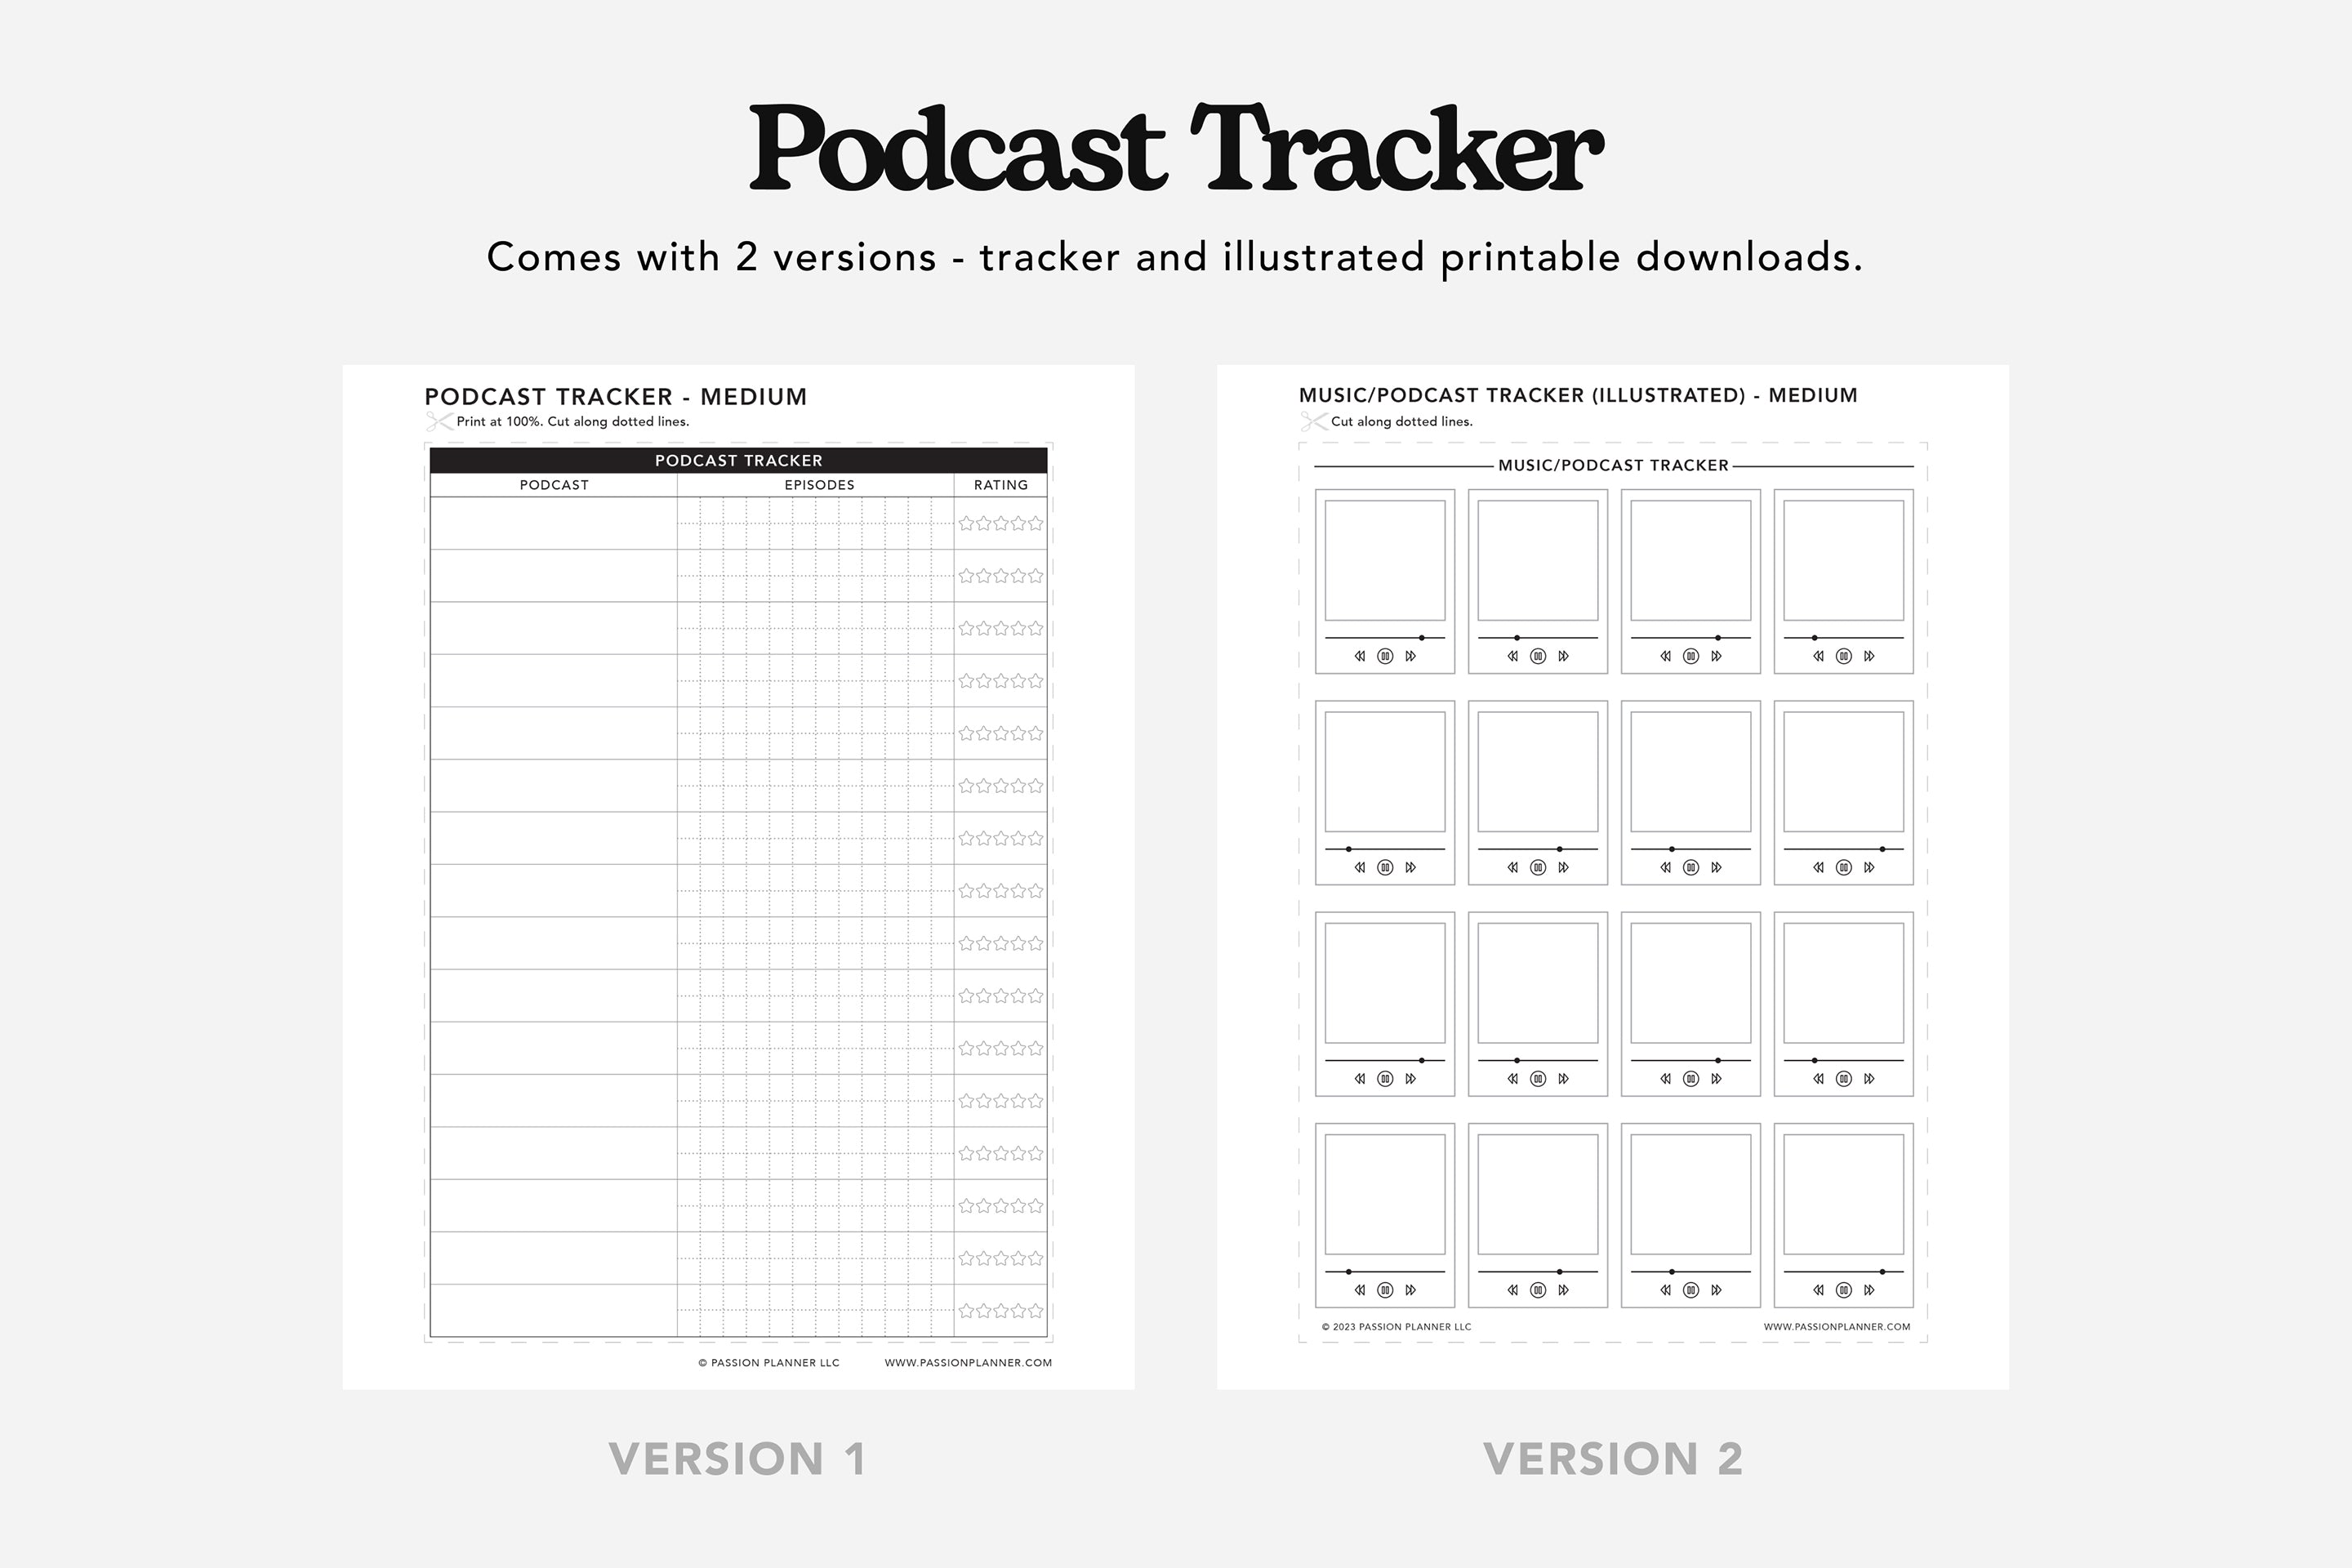 Movie, TV Show, Music, and Podcast Tracker PDFs